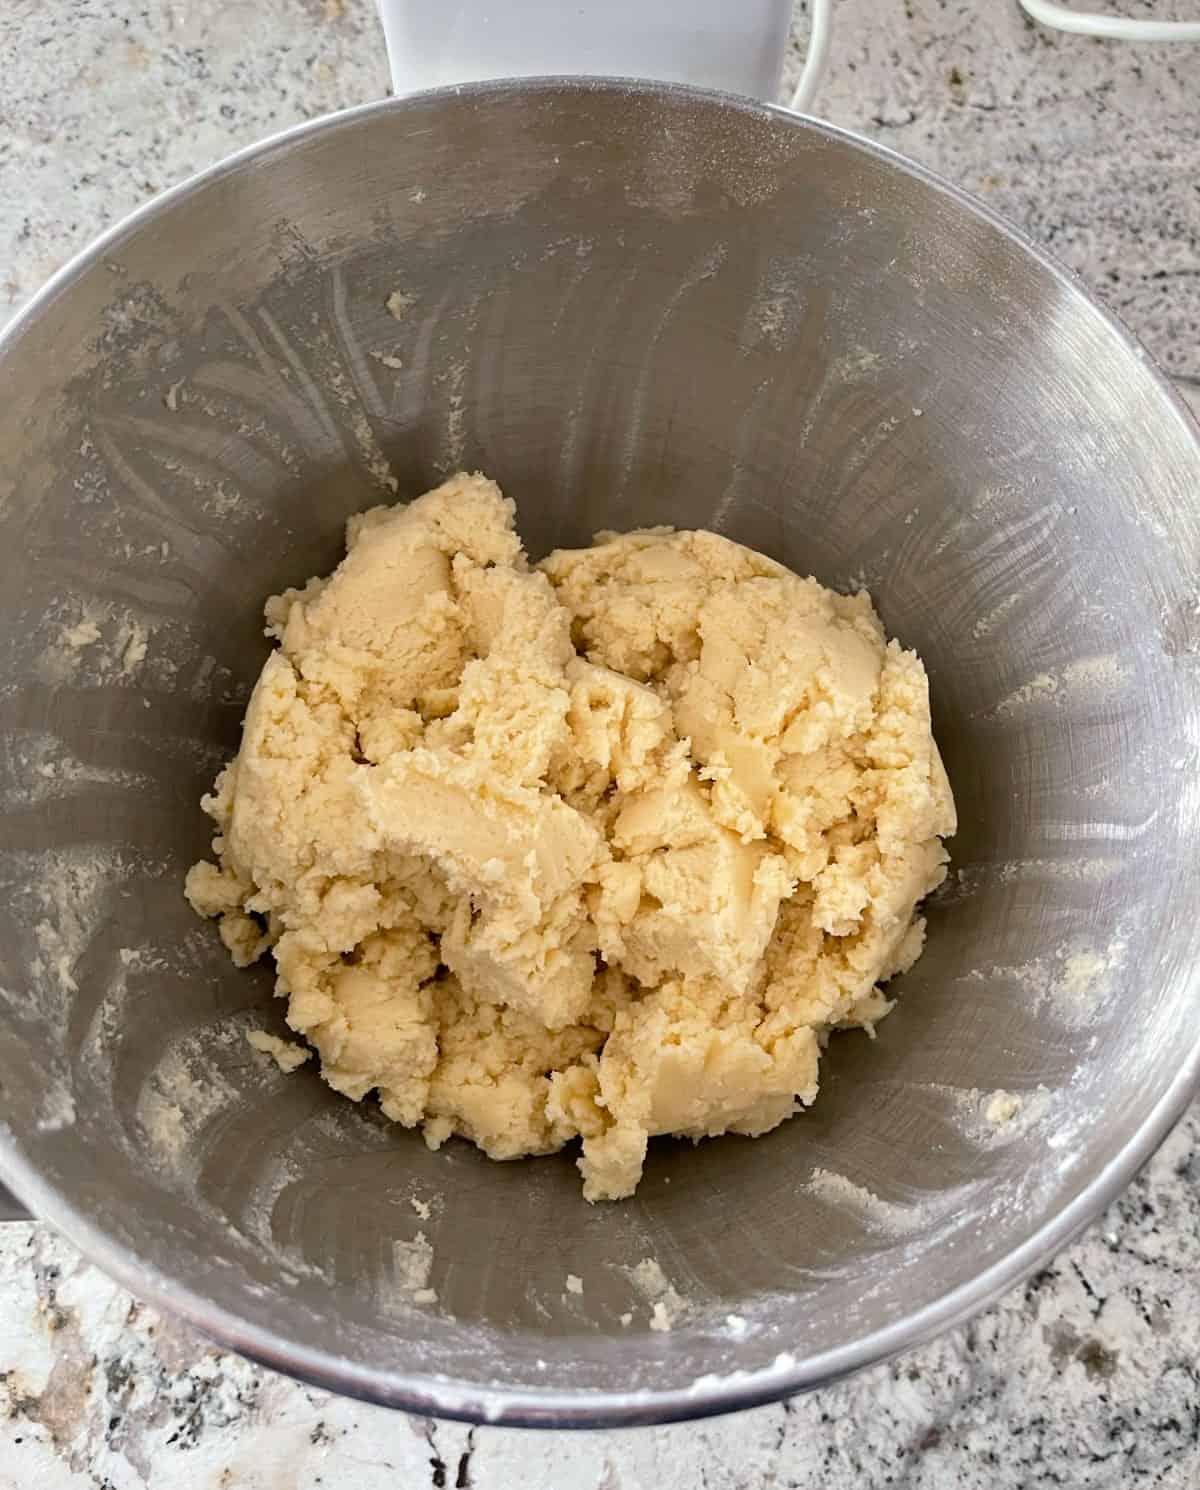 Eggnog snickerdoodle cookie dough resting in mixing bowl.